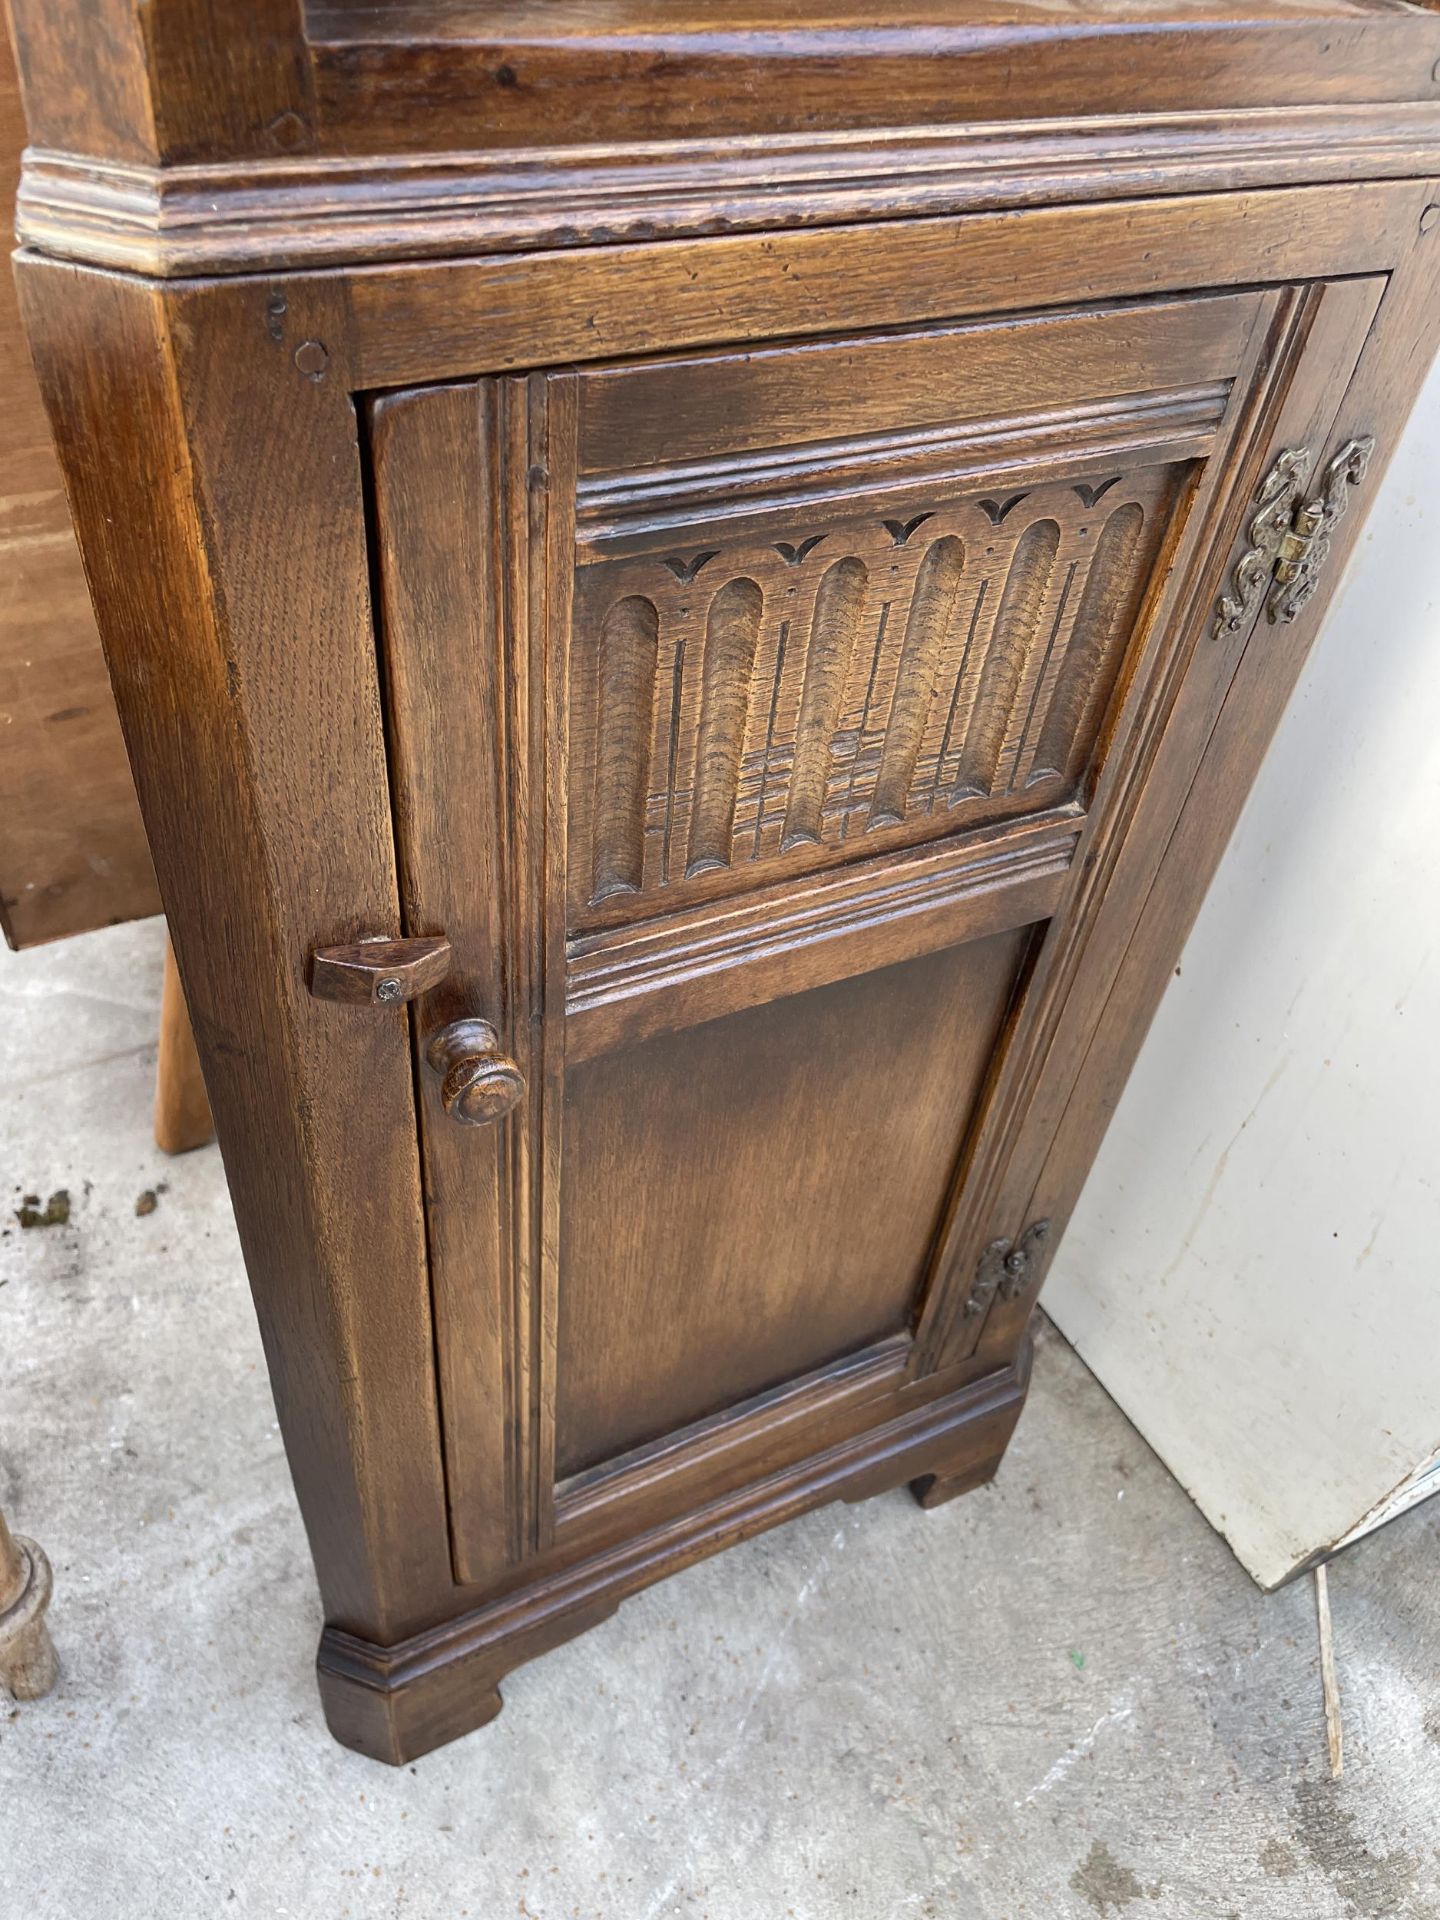 A REPRODUCTION OAK CORNER CUPBOARD WITH OPEN SHELVES TO THE UPPER PORTION, 17" WIDE - Image 3 of 4